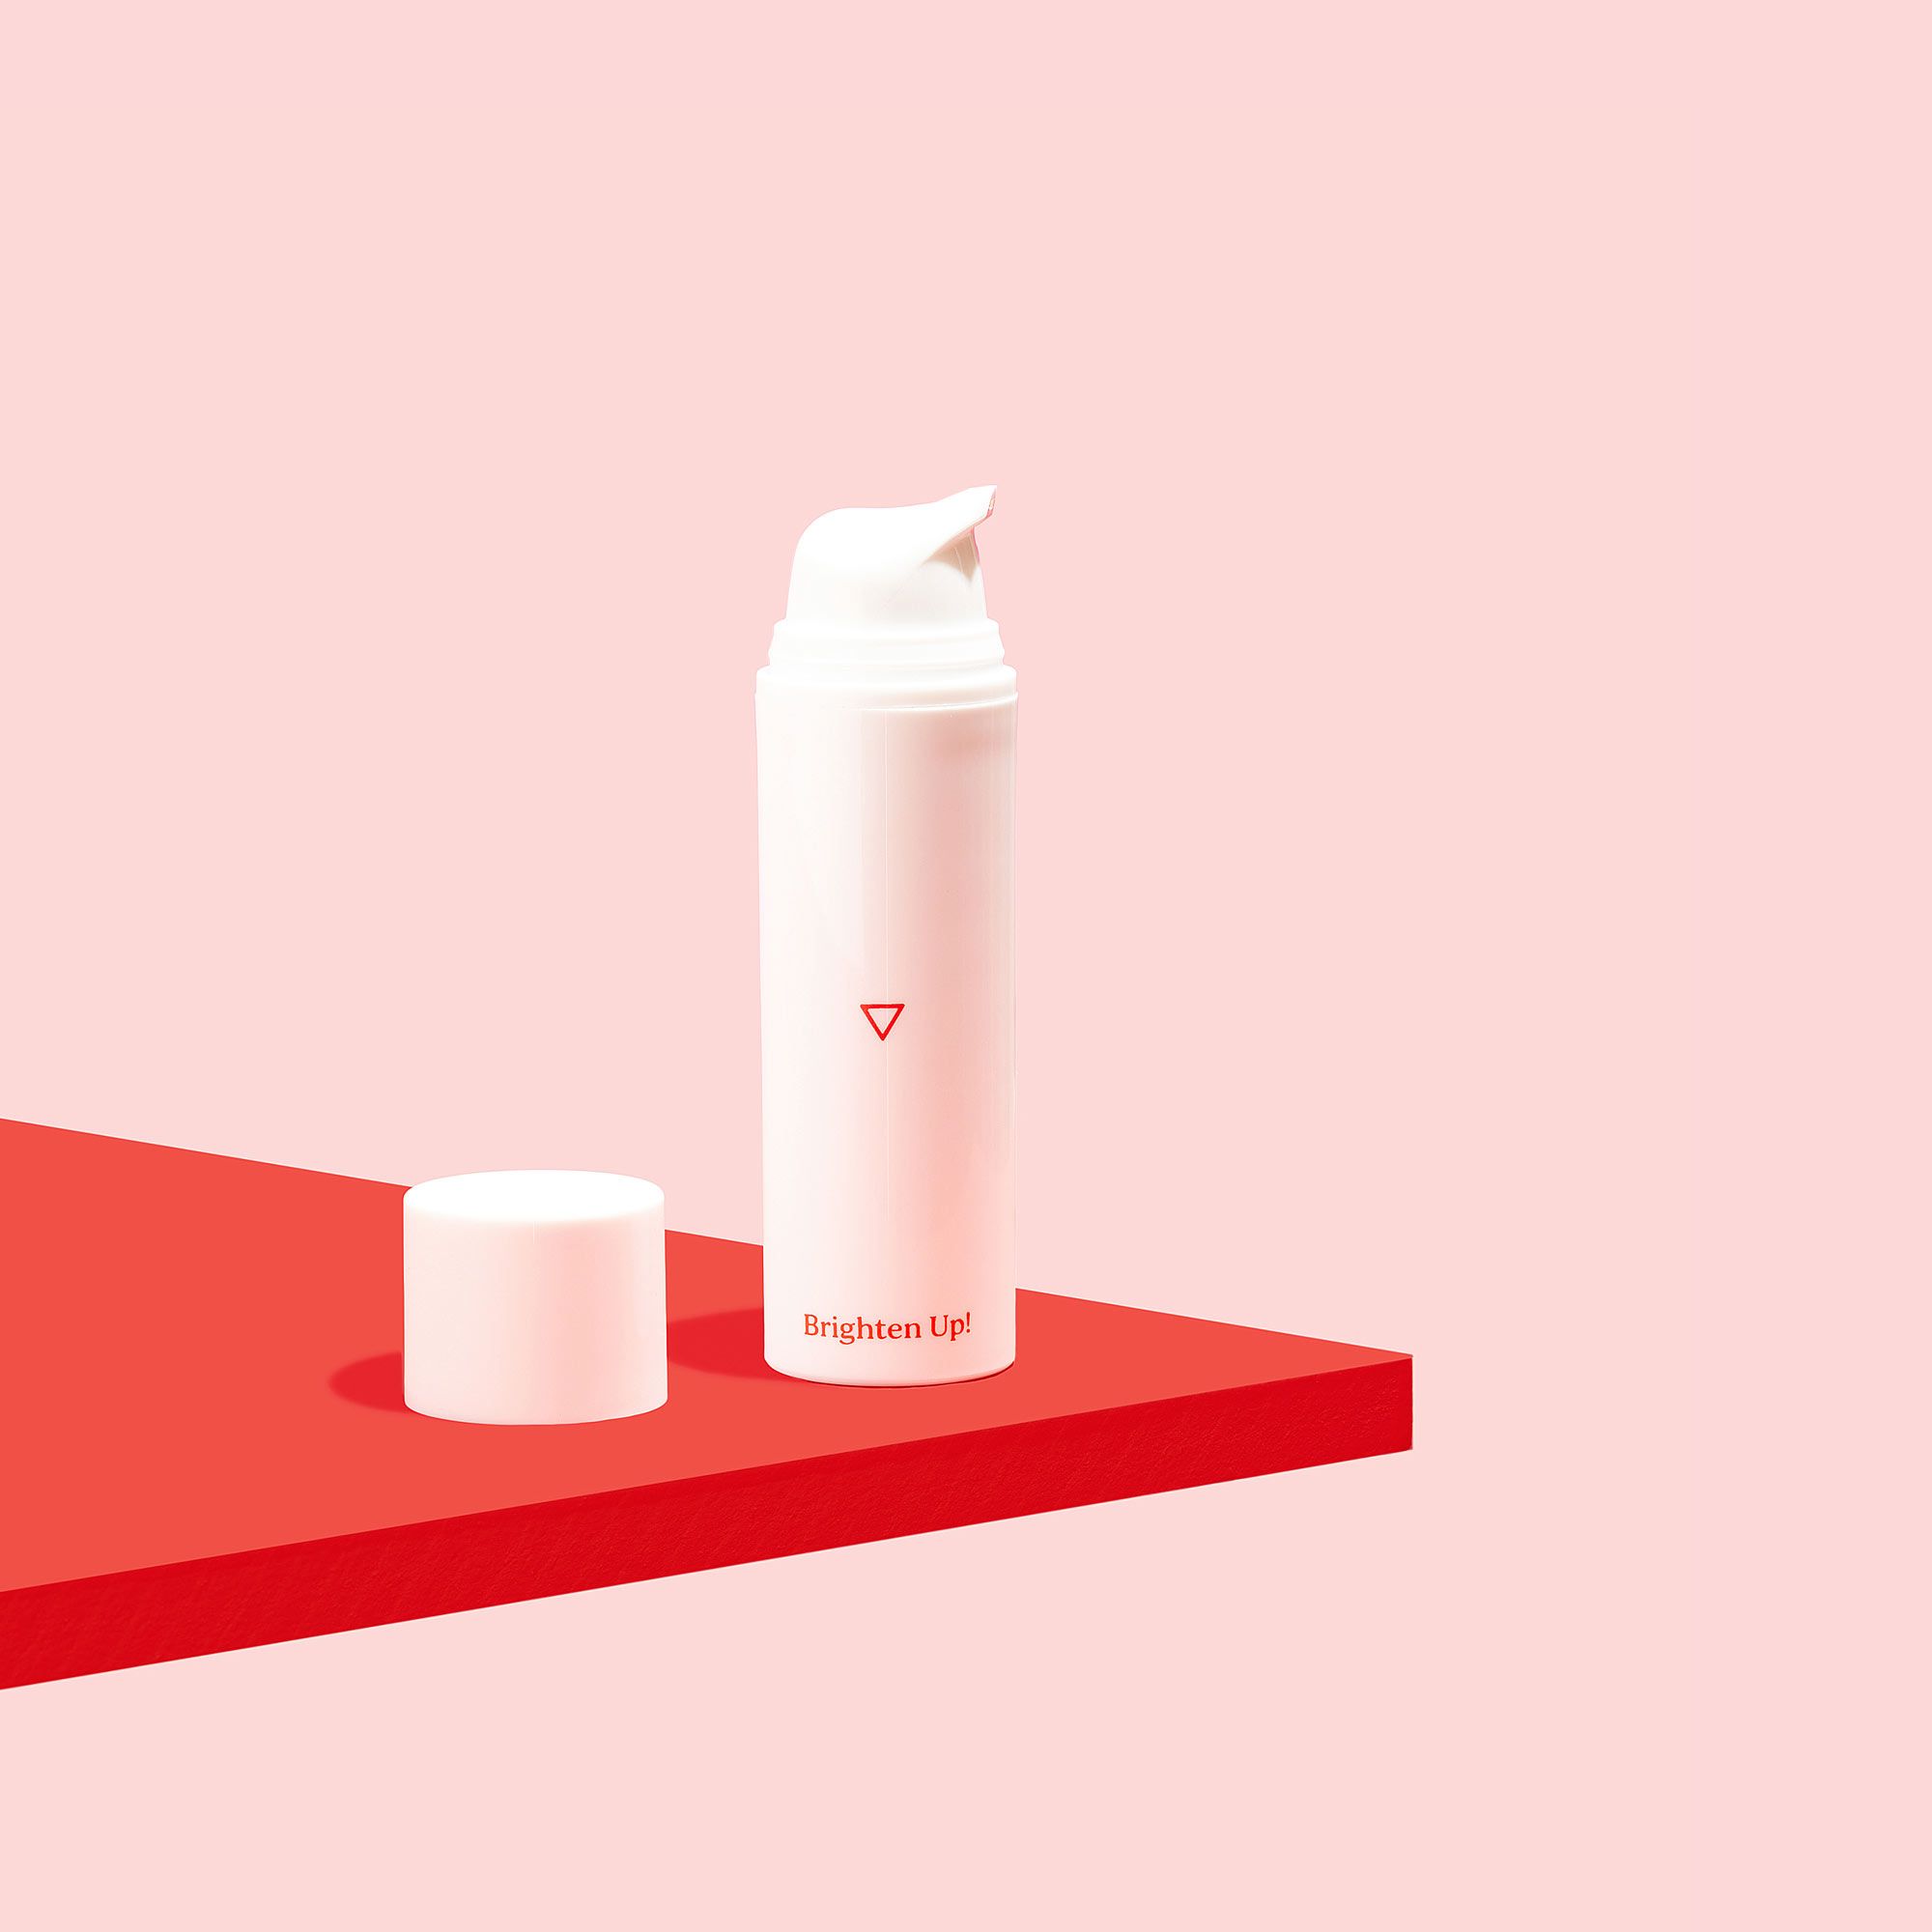 Bottle of Brighten Up! Hydroquinone Cream for hyperpigmentation on a red surface, on a pink background